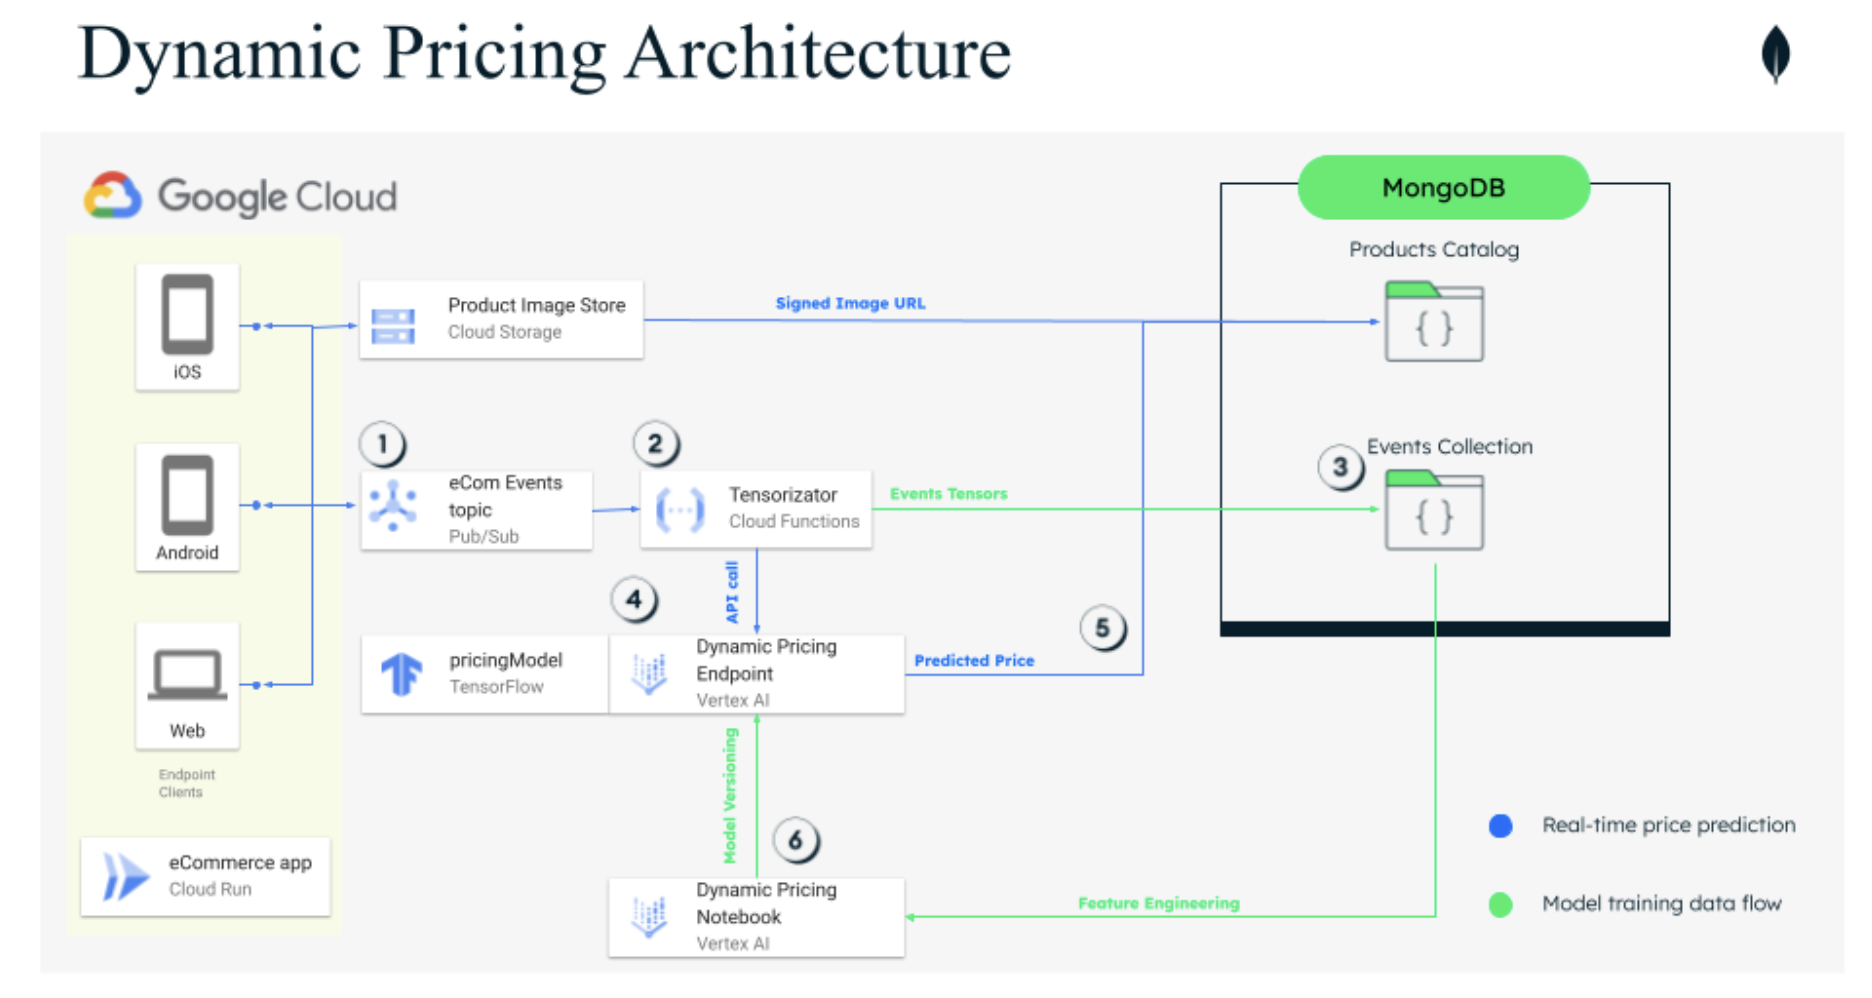 Architecture of a dynamic pricing solution built with Google Cloud Pub/Sub for real-time events ingestion, Cloud Functions for pre-processing, Vertex AI for model training and endpoint deployment, and MongoDB as the operational data layer and feature store.